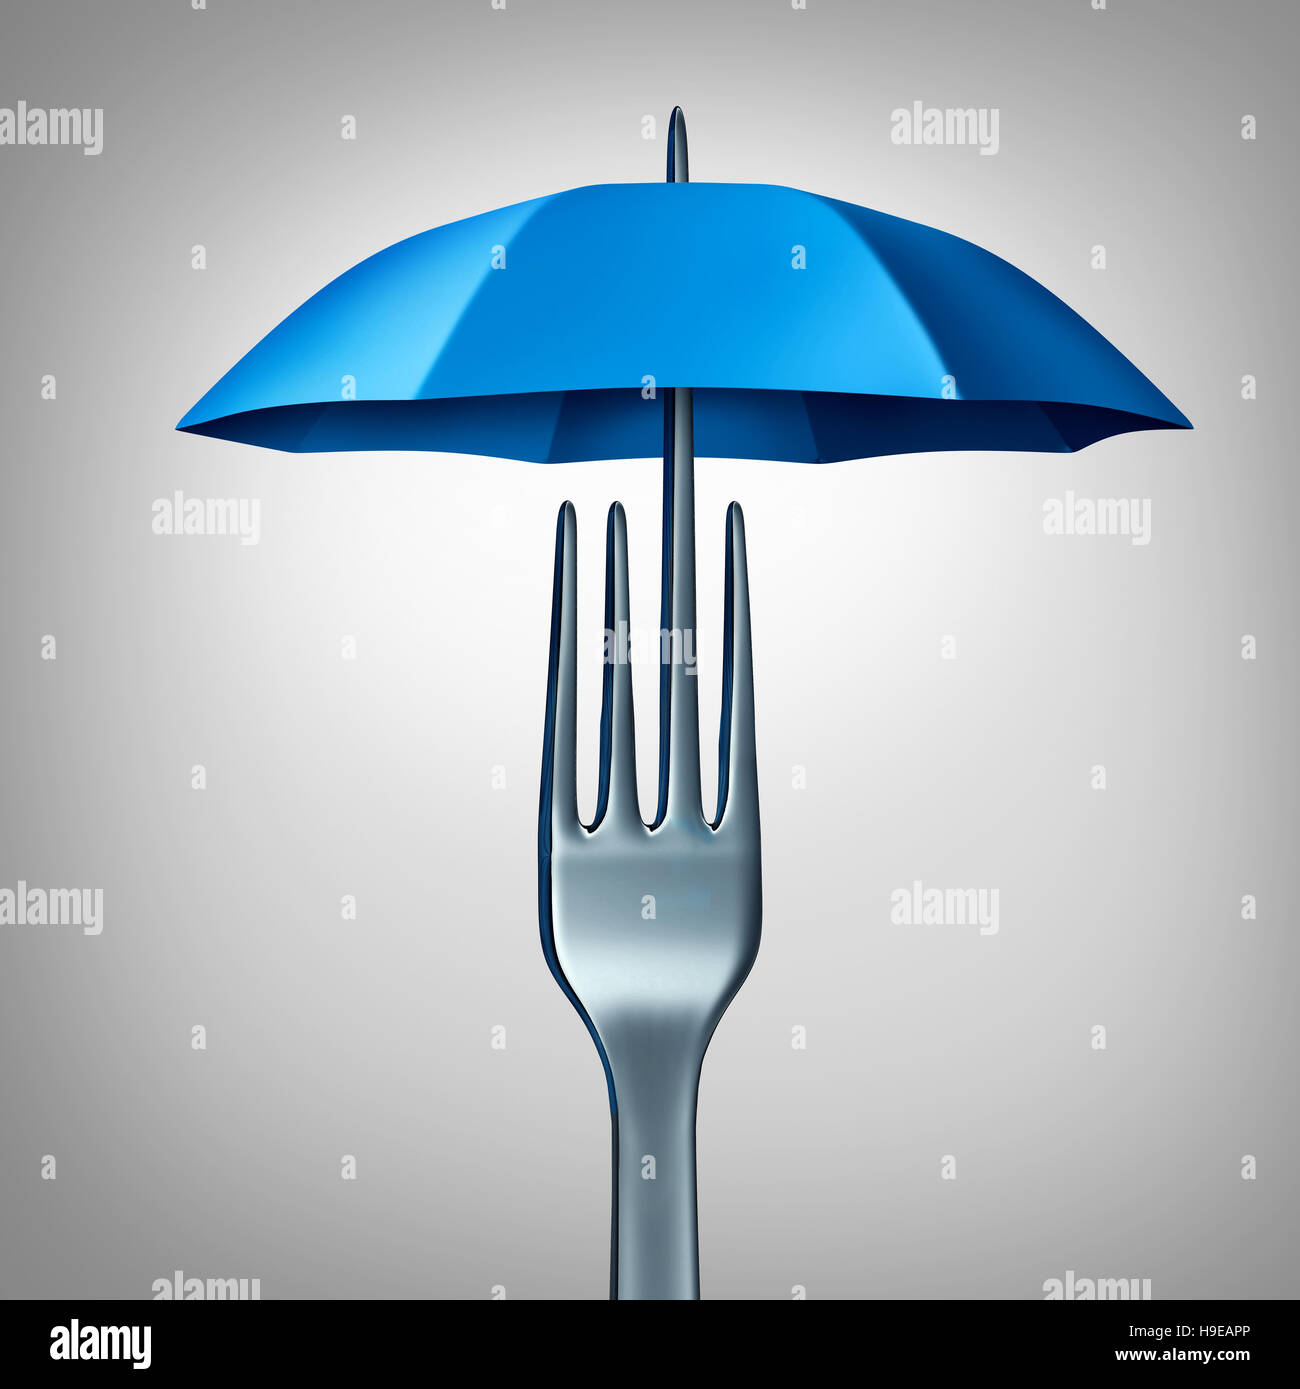 Food protection and eating safety symbol as a fork shaped with an umbrella as a freshness and hygiene or contamination prevention icon as a 3D illustr Stock Photo